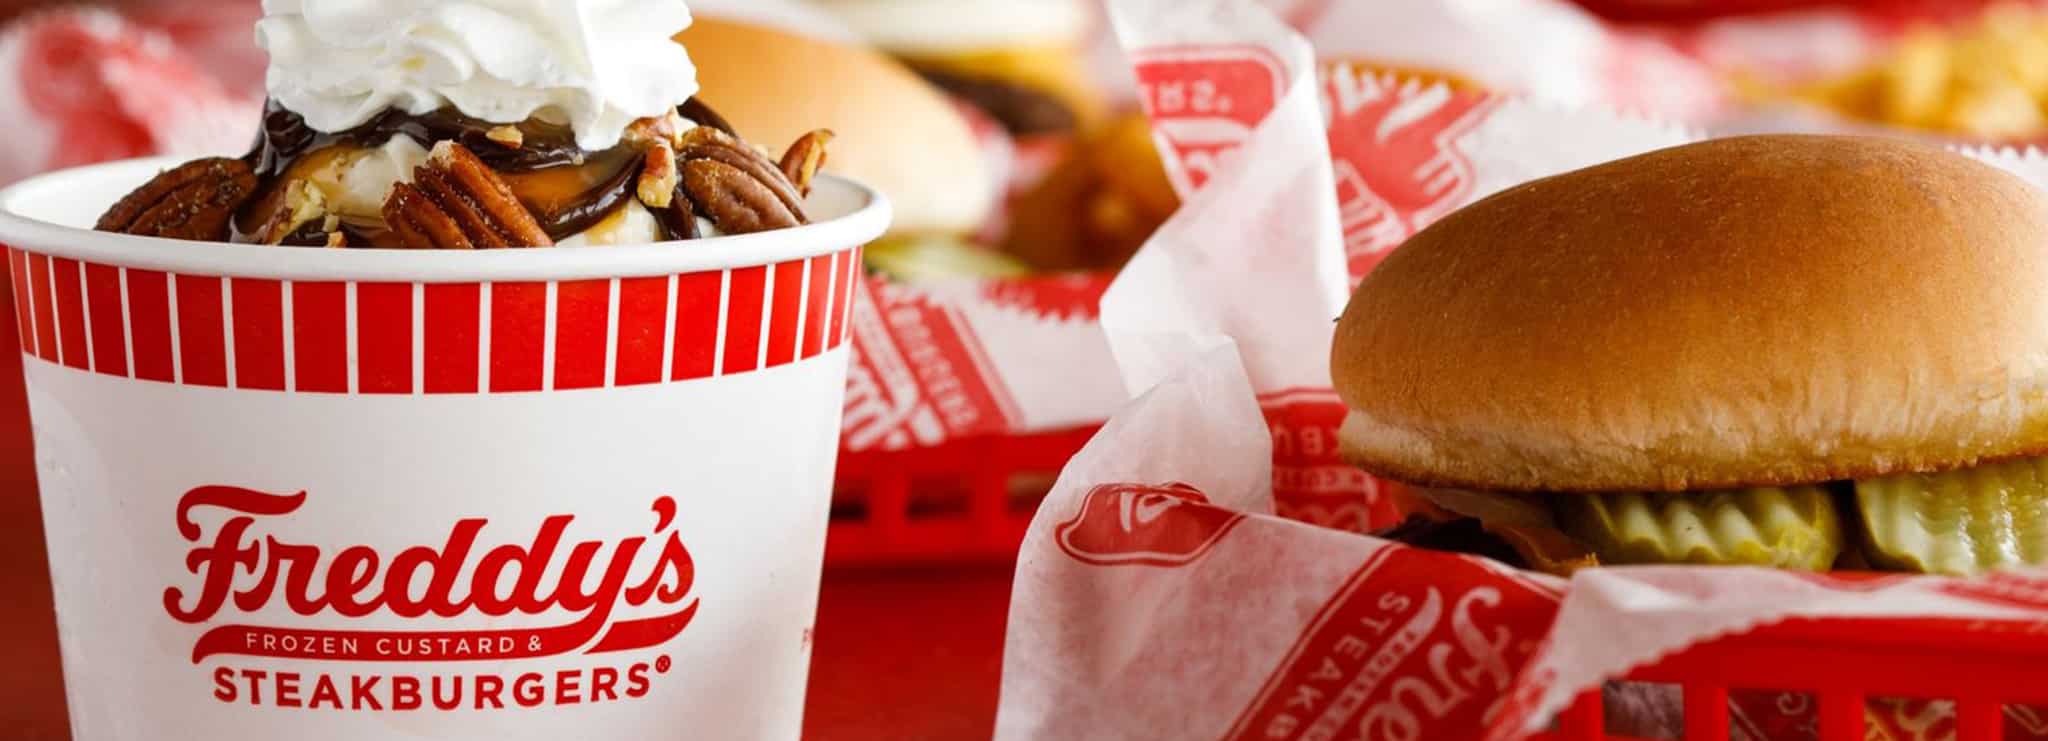 Two Locations of Freddy's Frozen Custard & Steakburgers Coming to